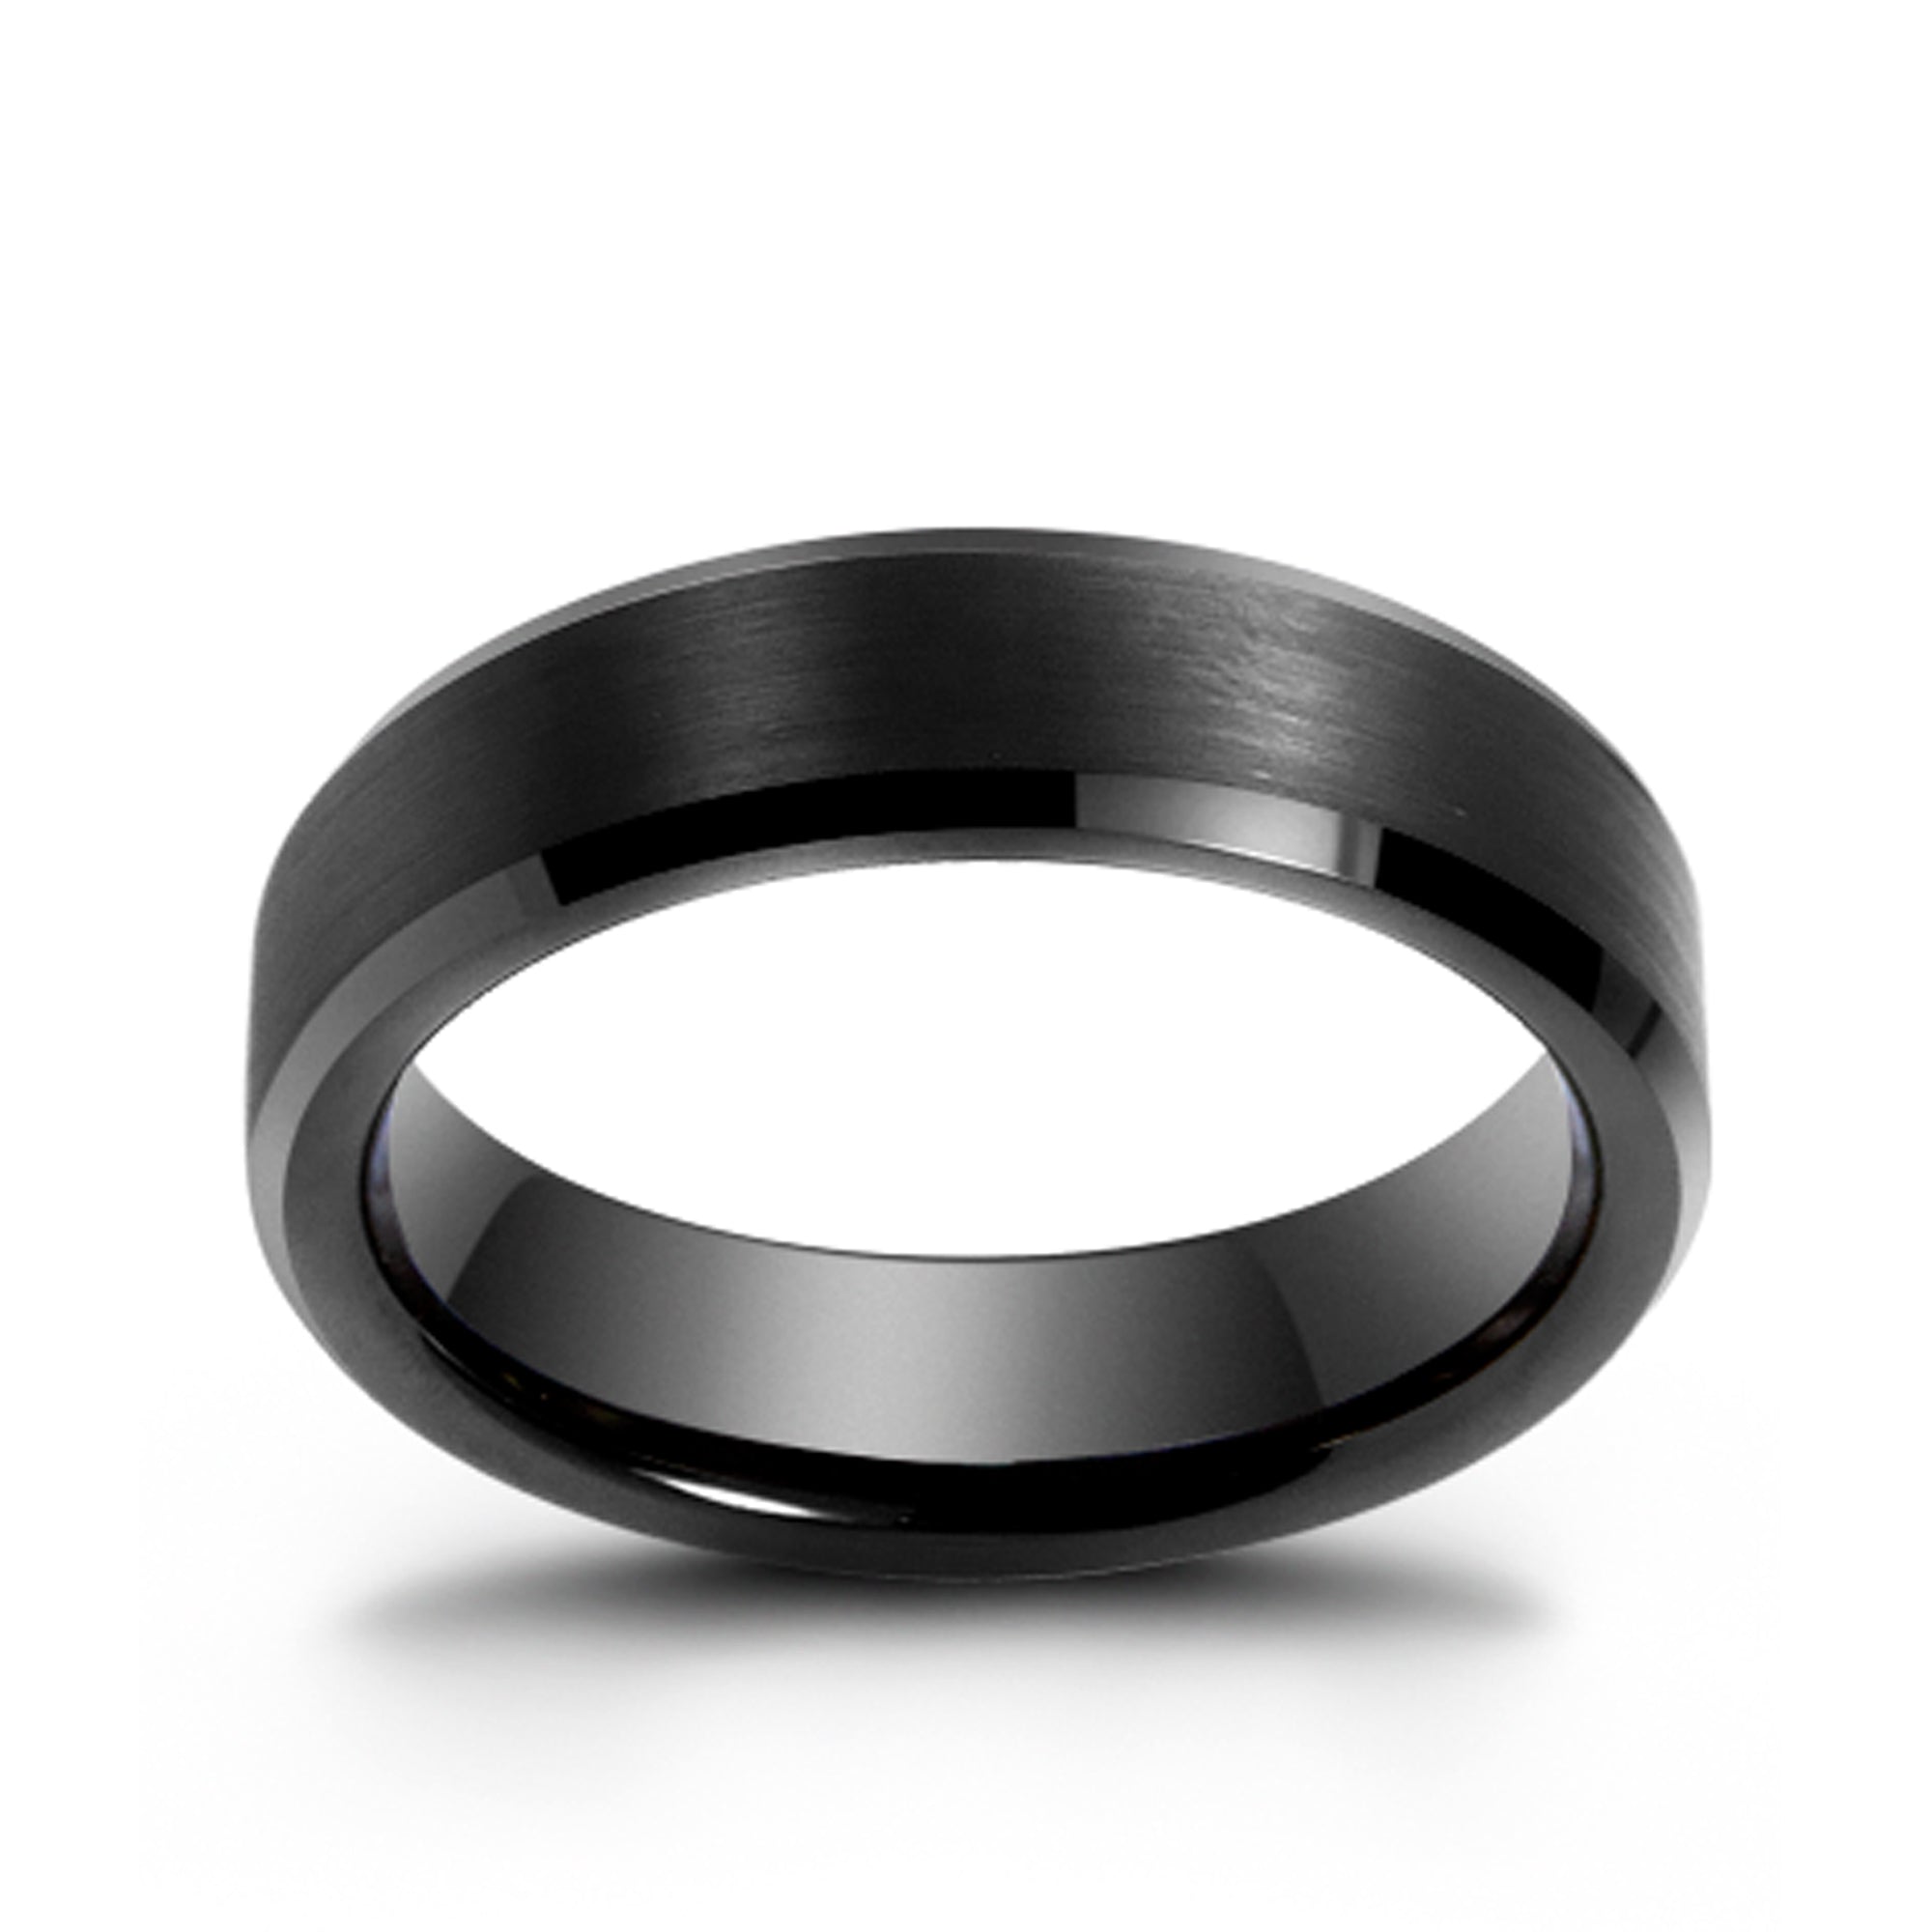 Black Matte Satin Finished Tungsten Carbide Ring with Polished Beveled Edge, 6MM